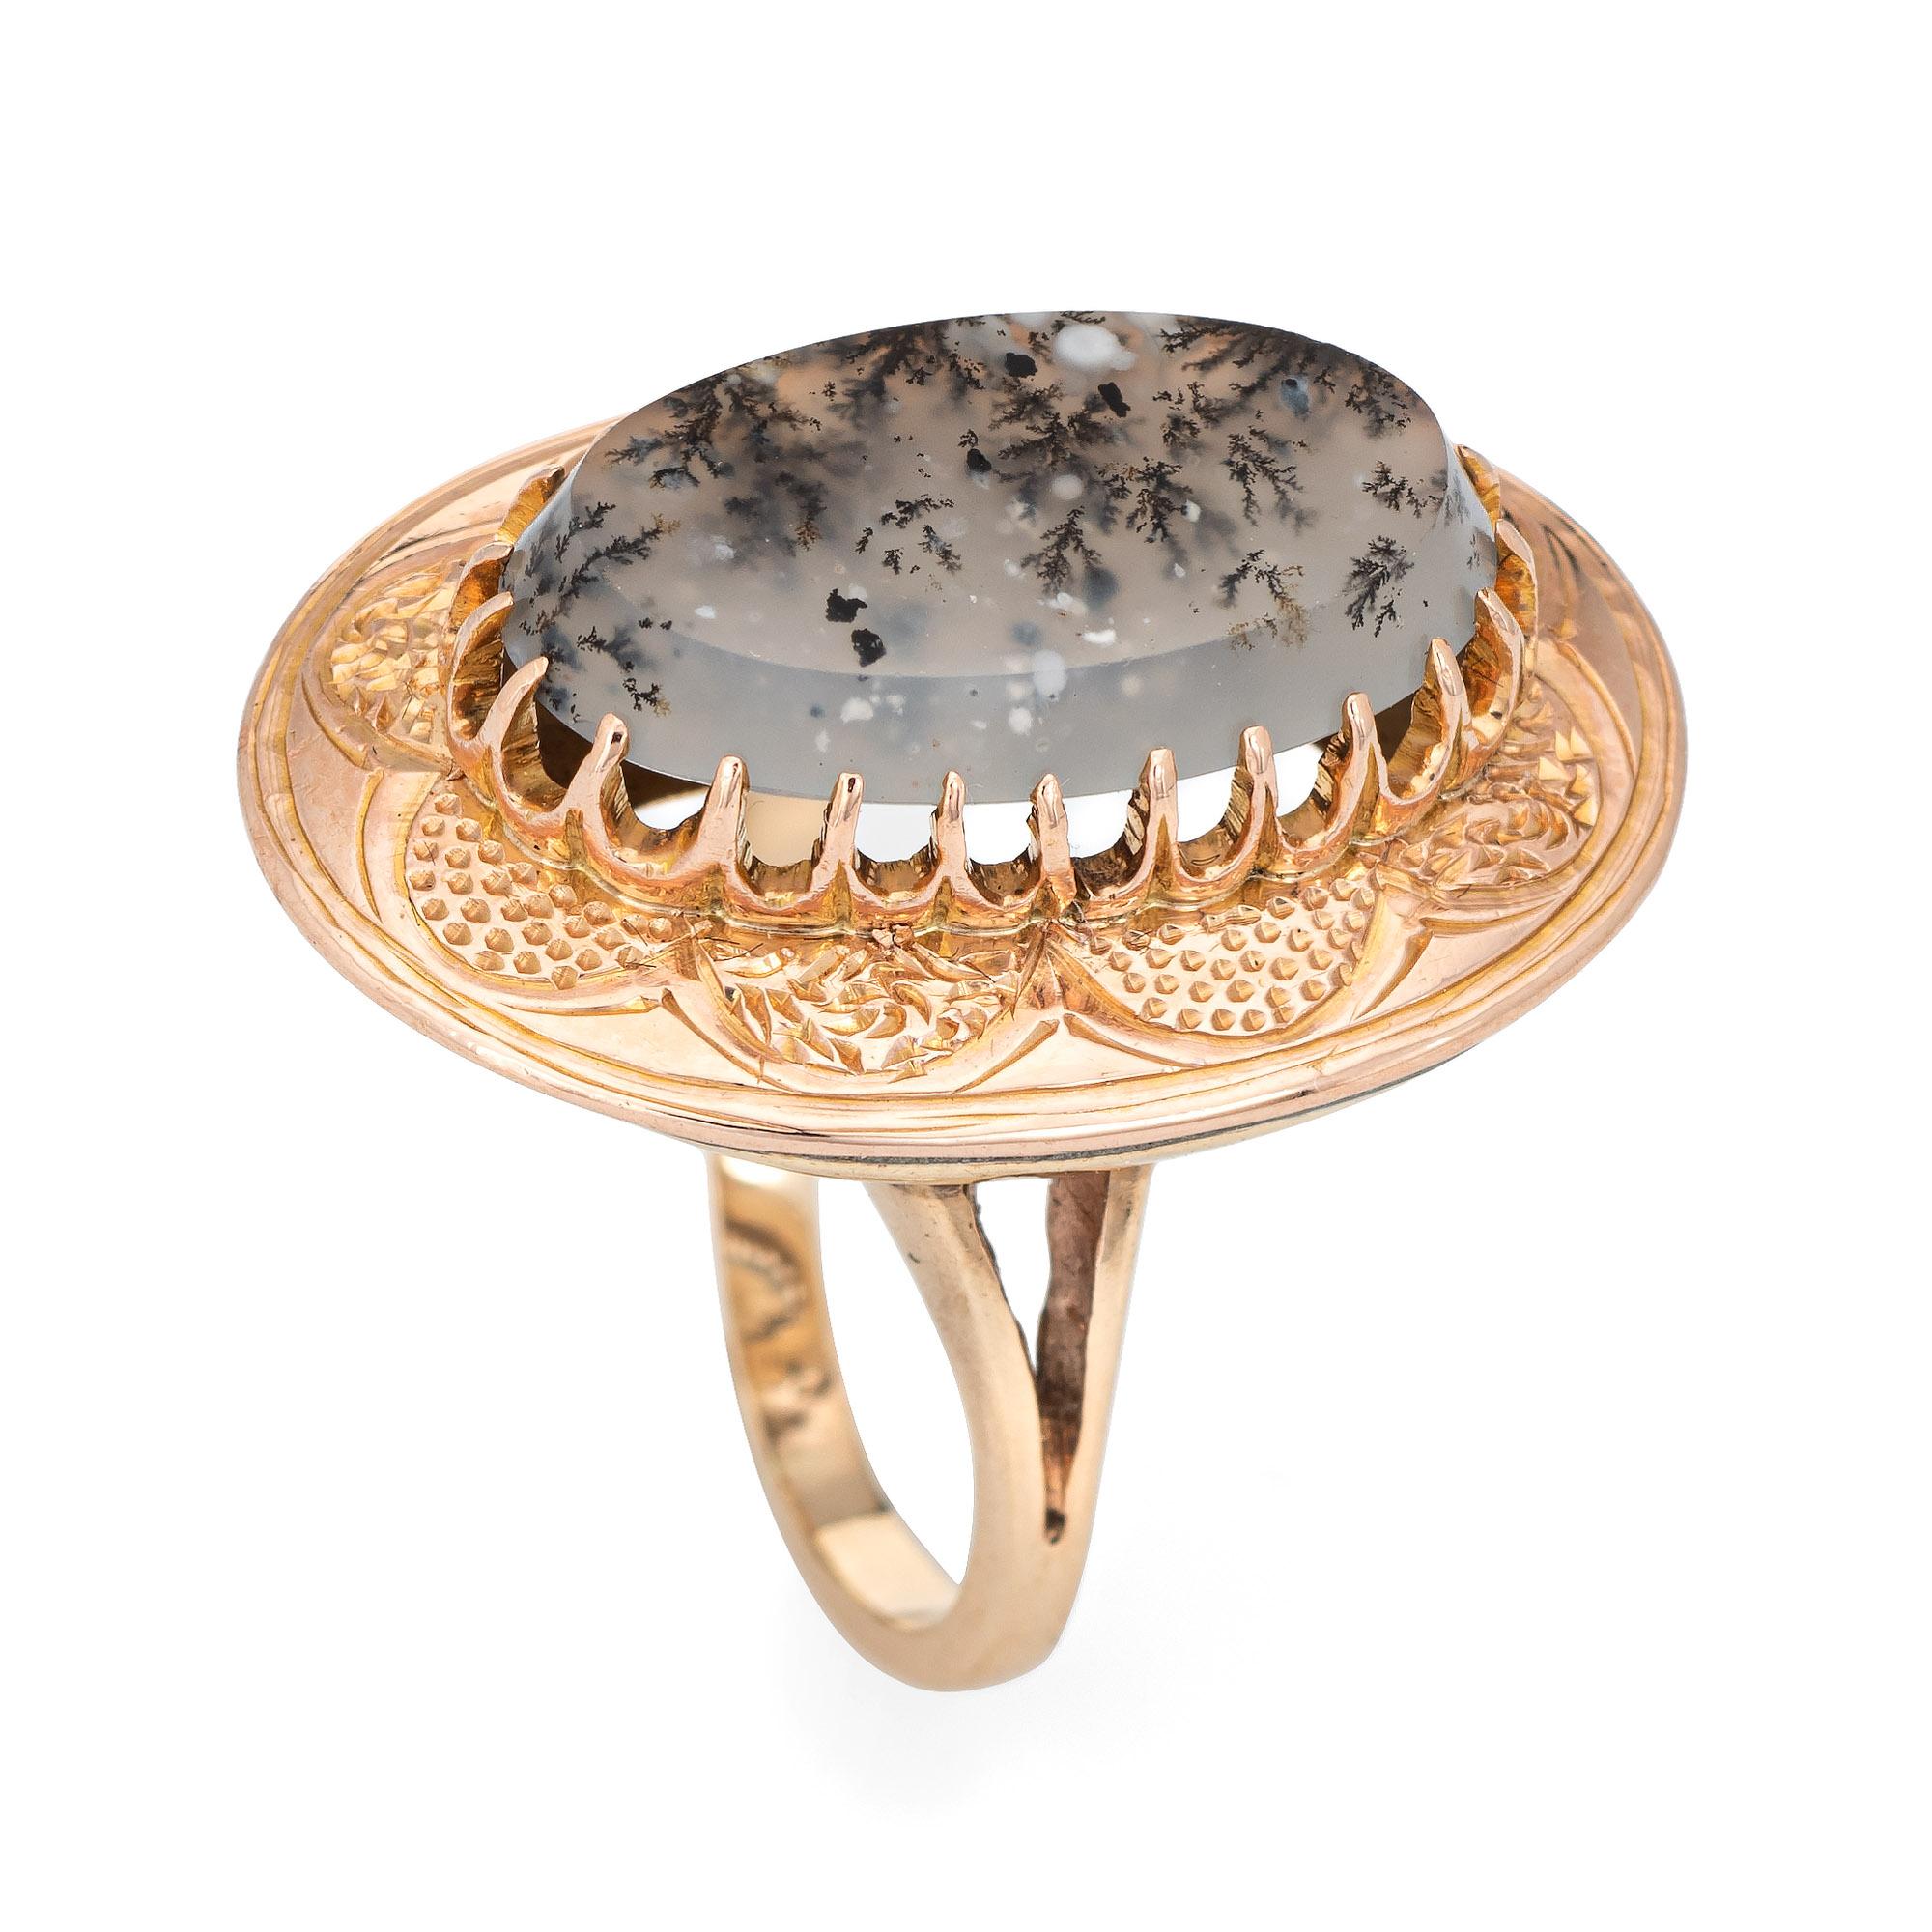 Stylish vintage moss agate cocktail ring (circa 1950s to 1960s) crafted in 10 karat rose gold. 

Moss agate measures 18mm x 10mm. The agate is in excellent condition and free of cracks or chips. 

Moss agate is like looking into a small forest with